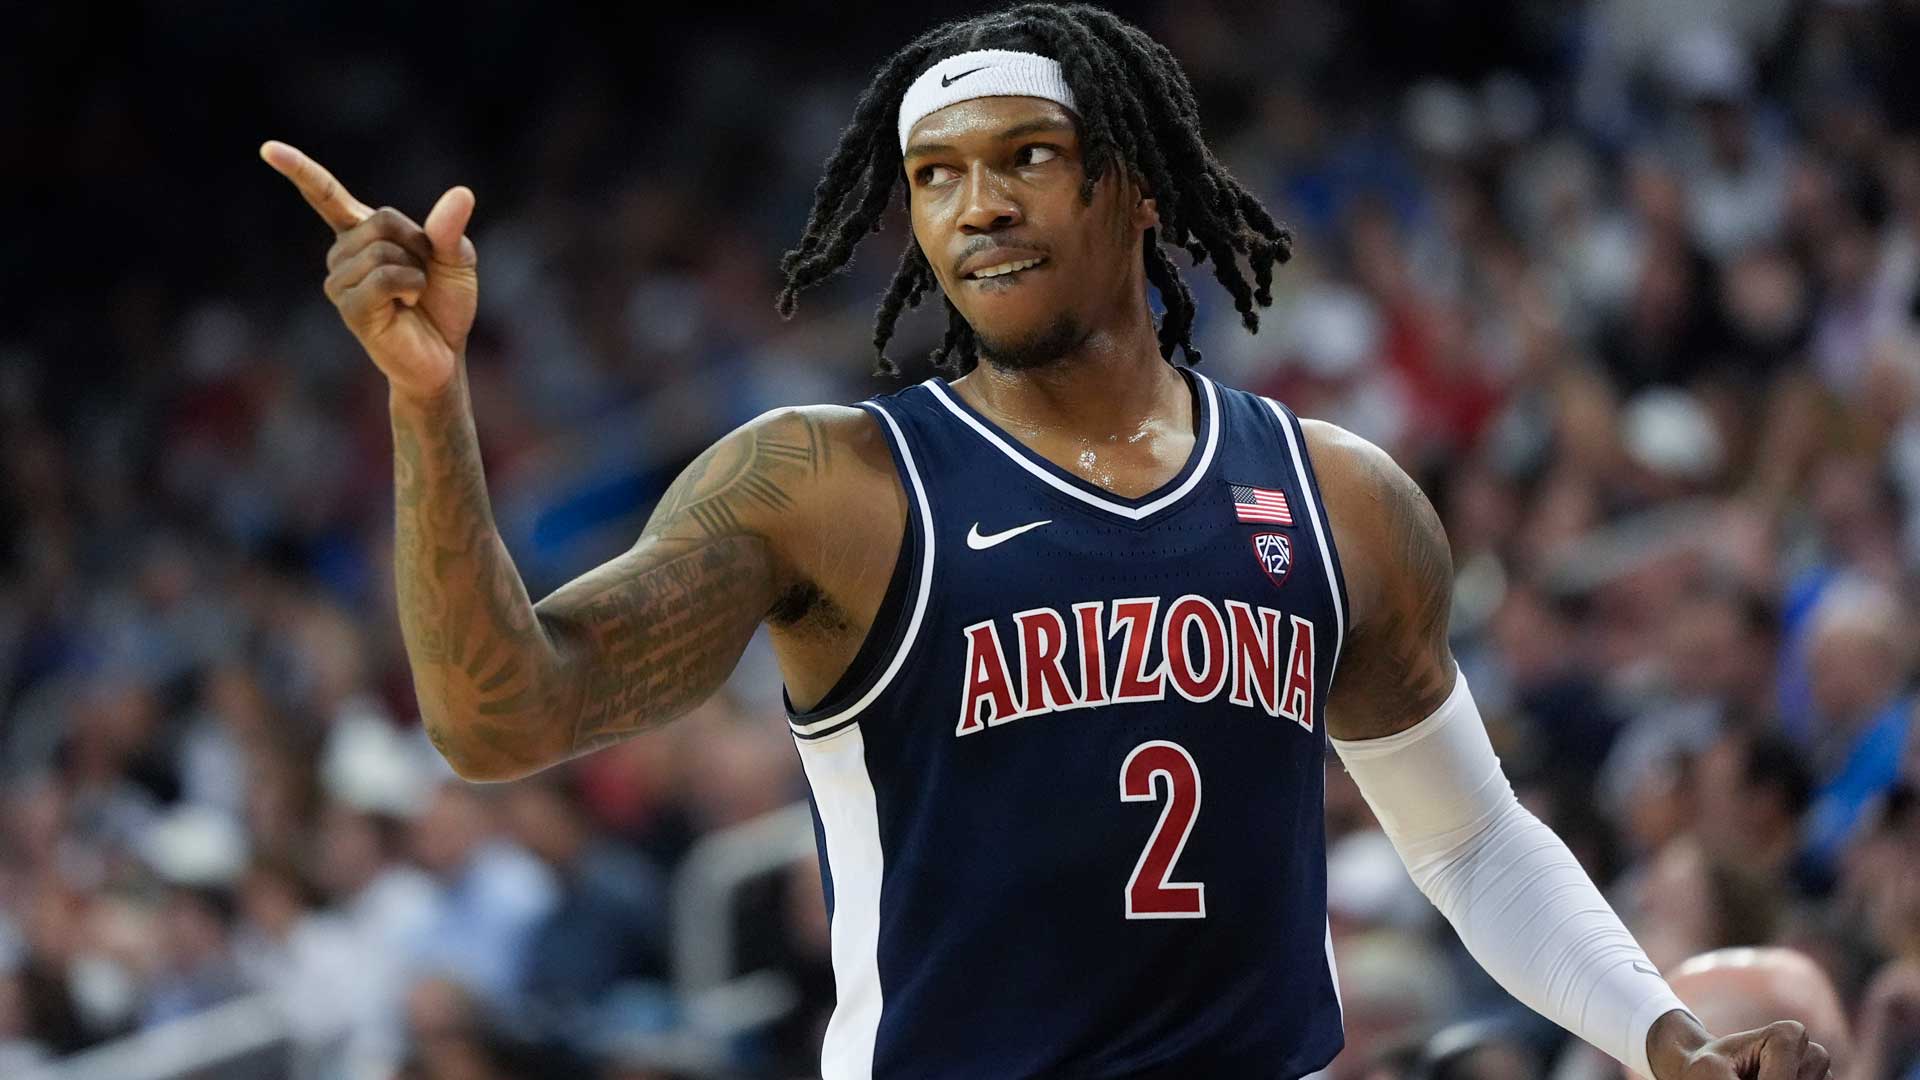 Arizona's Caleb Love wins AP Pac-12 player and newcomer of the year in first season with Wildcats 